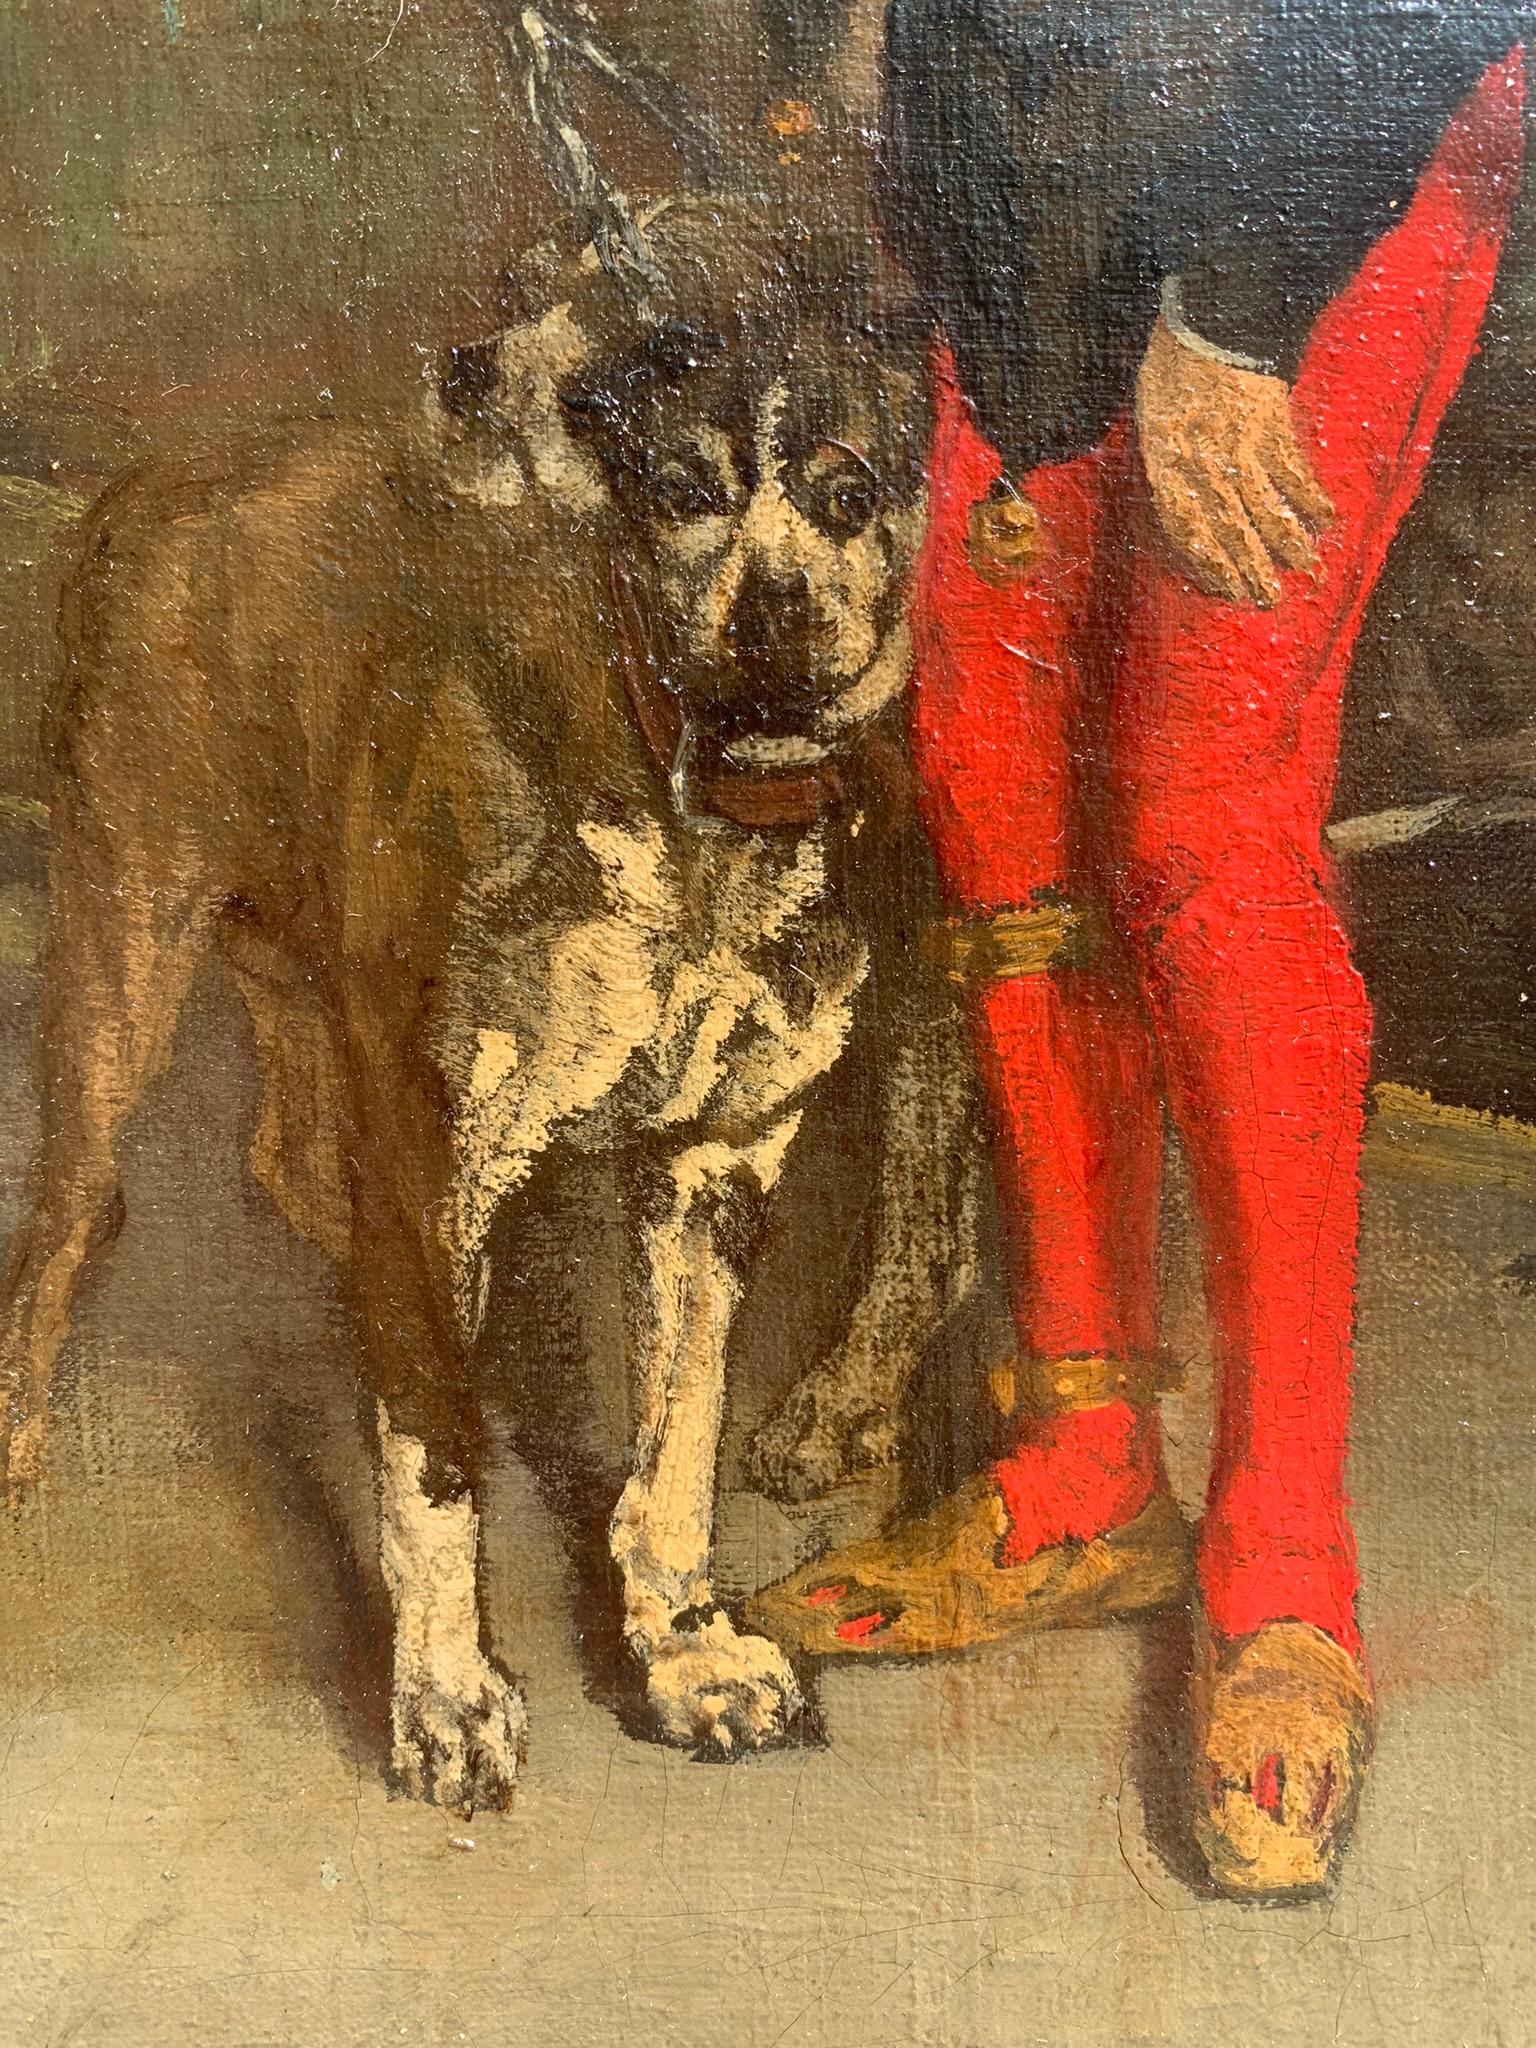 A court jester with dogs.
Late 19th century. 
French school painting. 
Technique: oil on canvas, original canvas.
The court jester, in the company of two dogs, richly dressed in red and black, holds a puppet with a jester's hat in turn. 
The